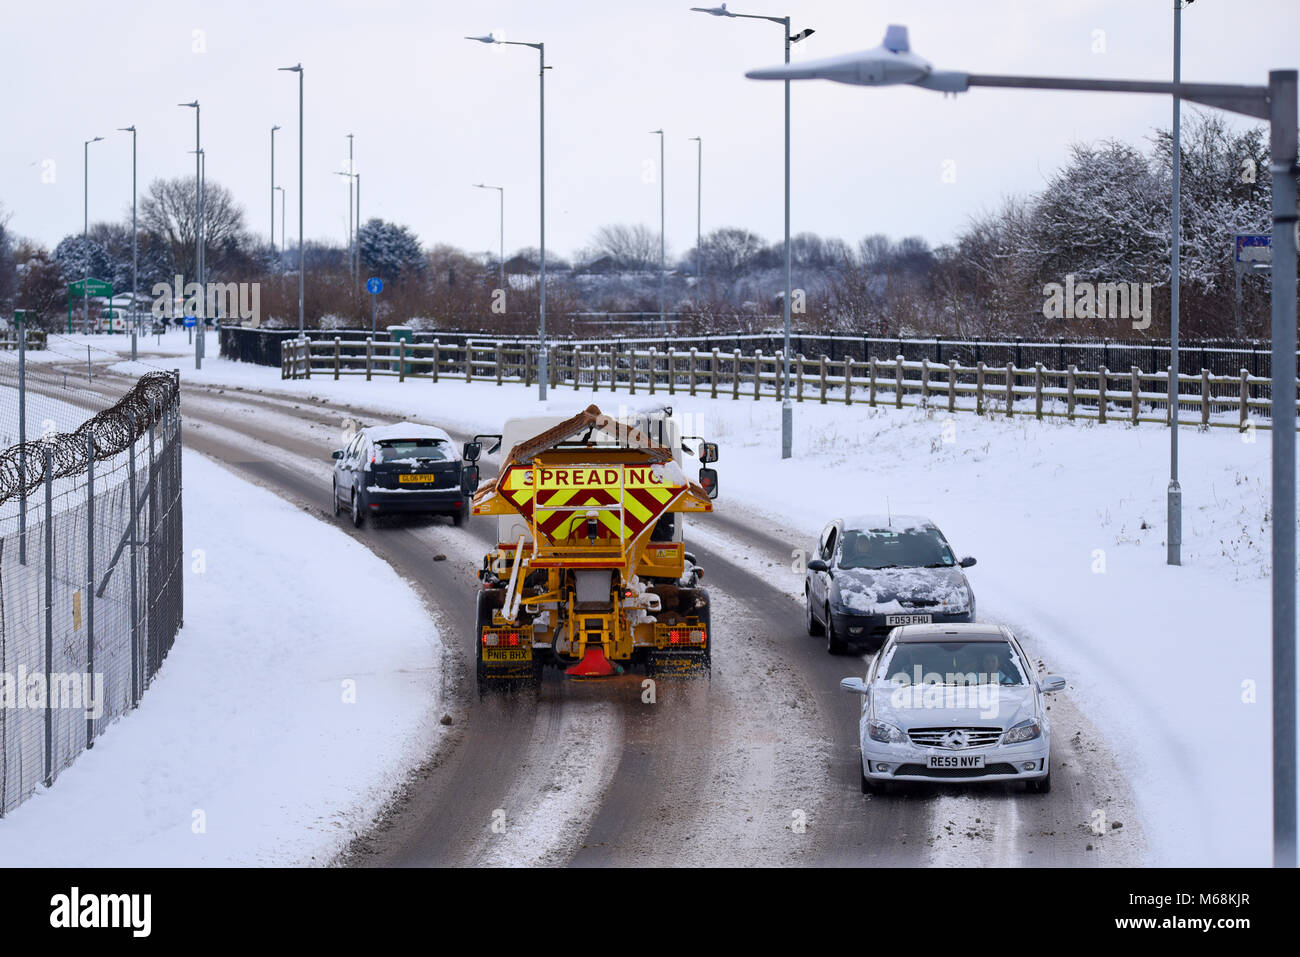 Grit salt spreading gritting on a snow covered road with cars during the beast from the east weather phenomenon. Space for copy Stock Photo